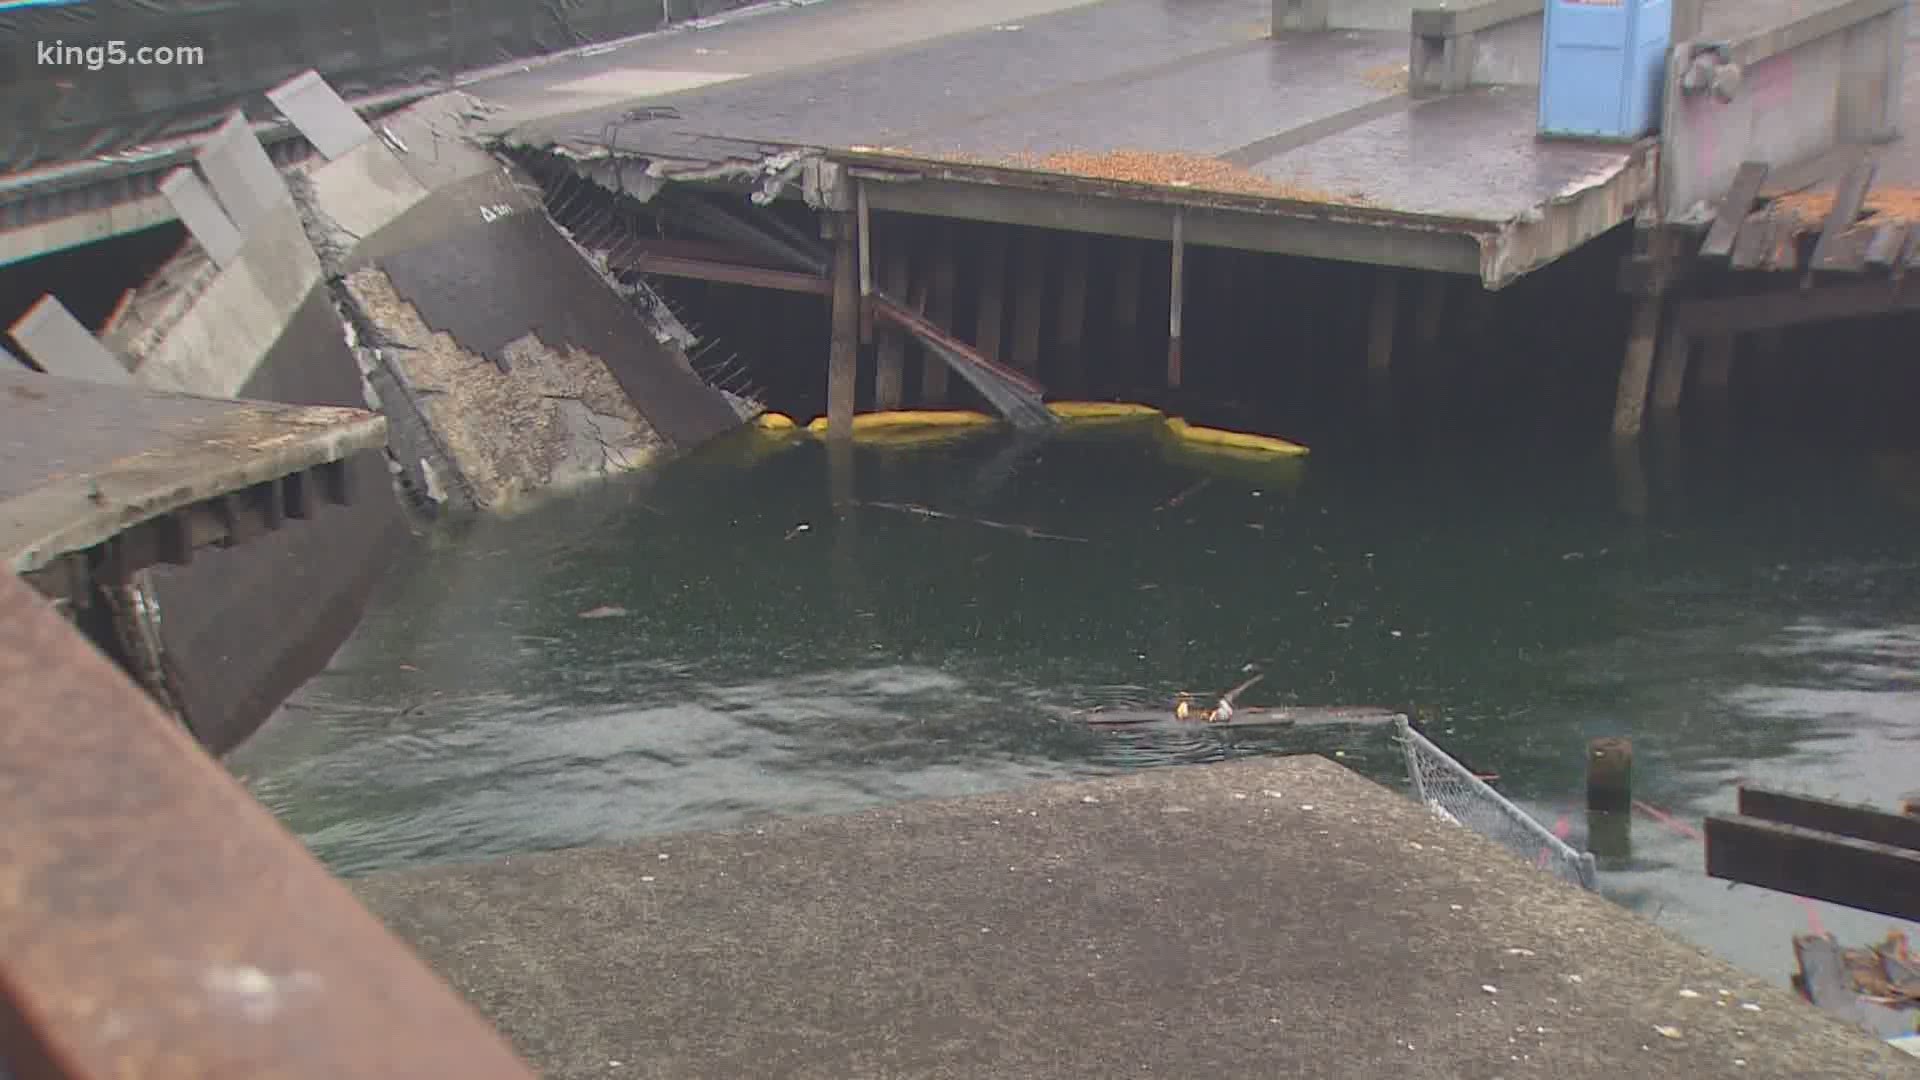 Crews were already working to dismantle the pier when it collapsed on Sunday evening.